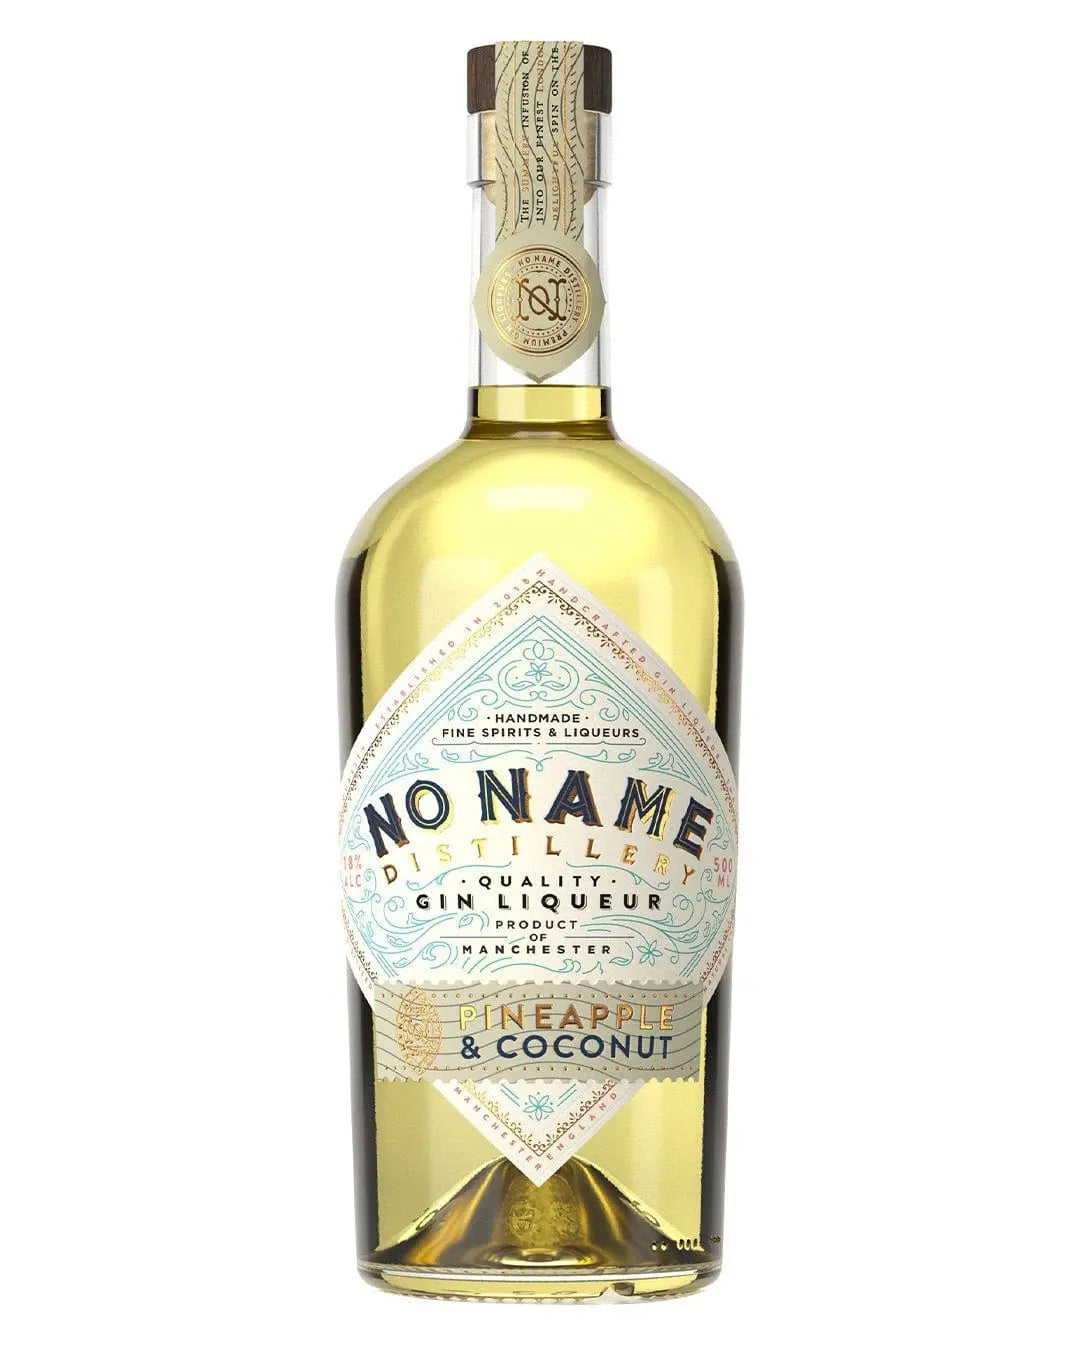 No Name Distillery Pineapple & Coconut Gin Liqueur, 50 cl Gin